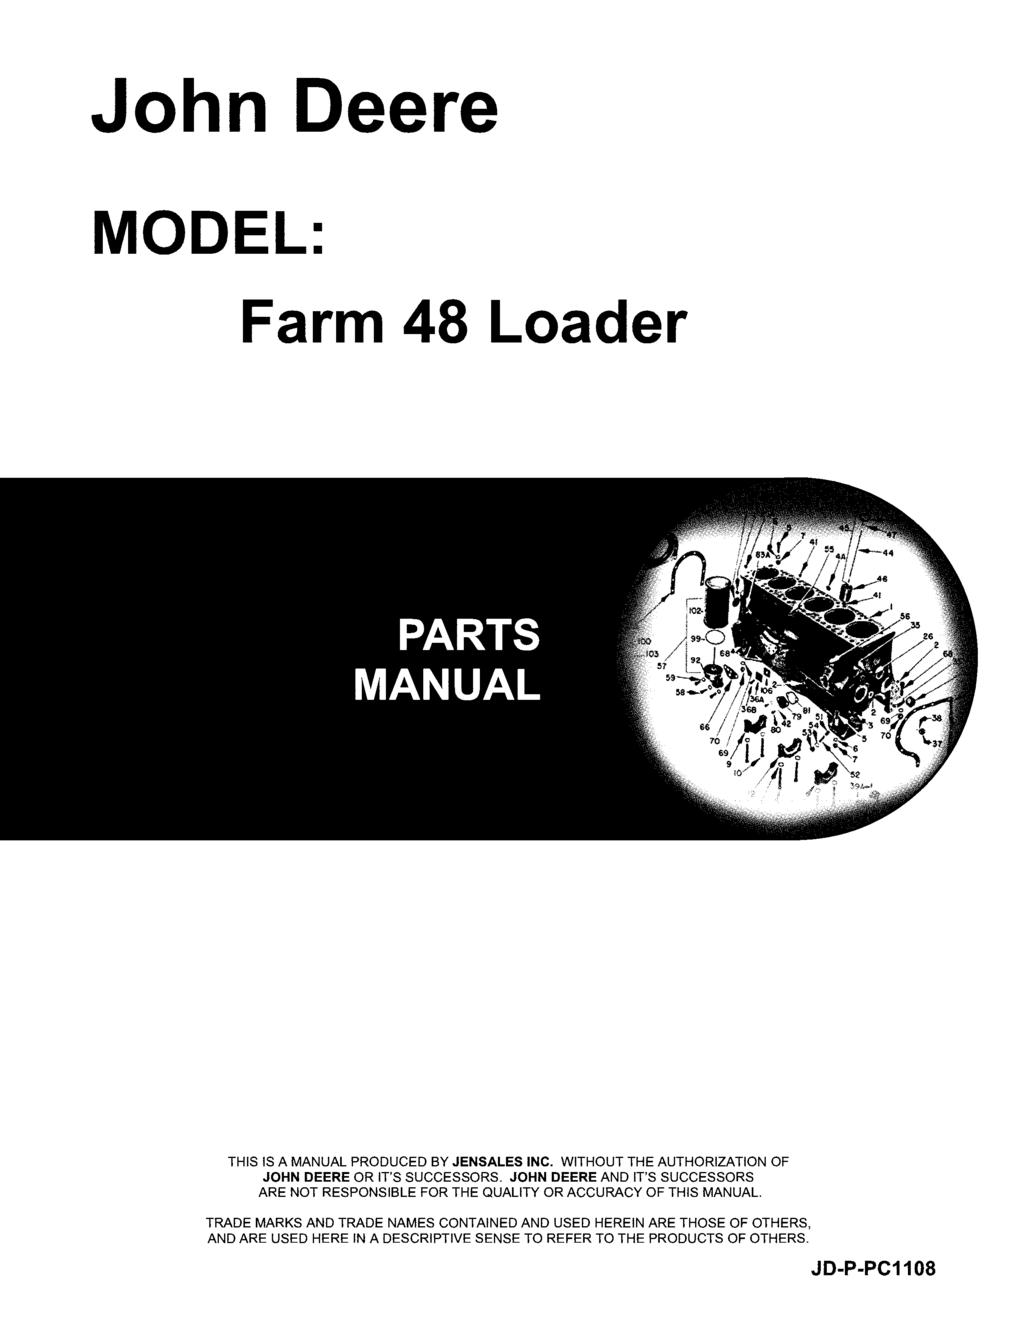 John Deere MODEL: Farm 48 Loader THIS IS A MANUAL PRODUCED BY JENSALES INC. WITHOUT THE AUTHORIZATION OF JOHN DEERE OR IT'S SUCCESSORS.